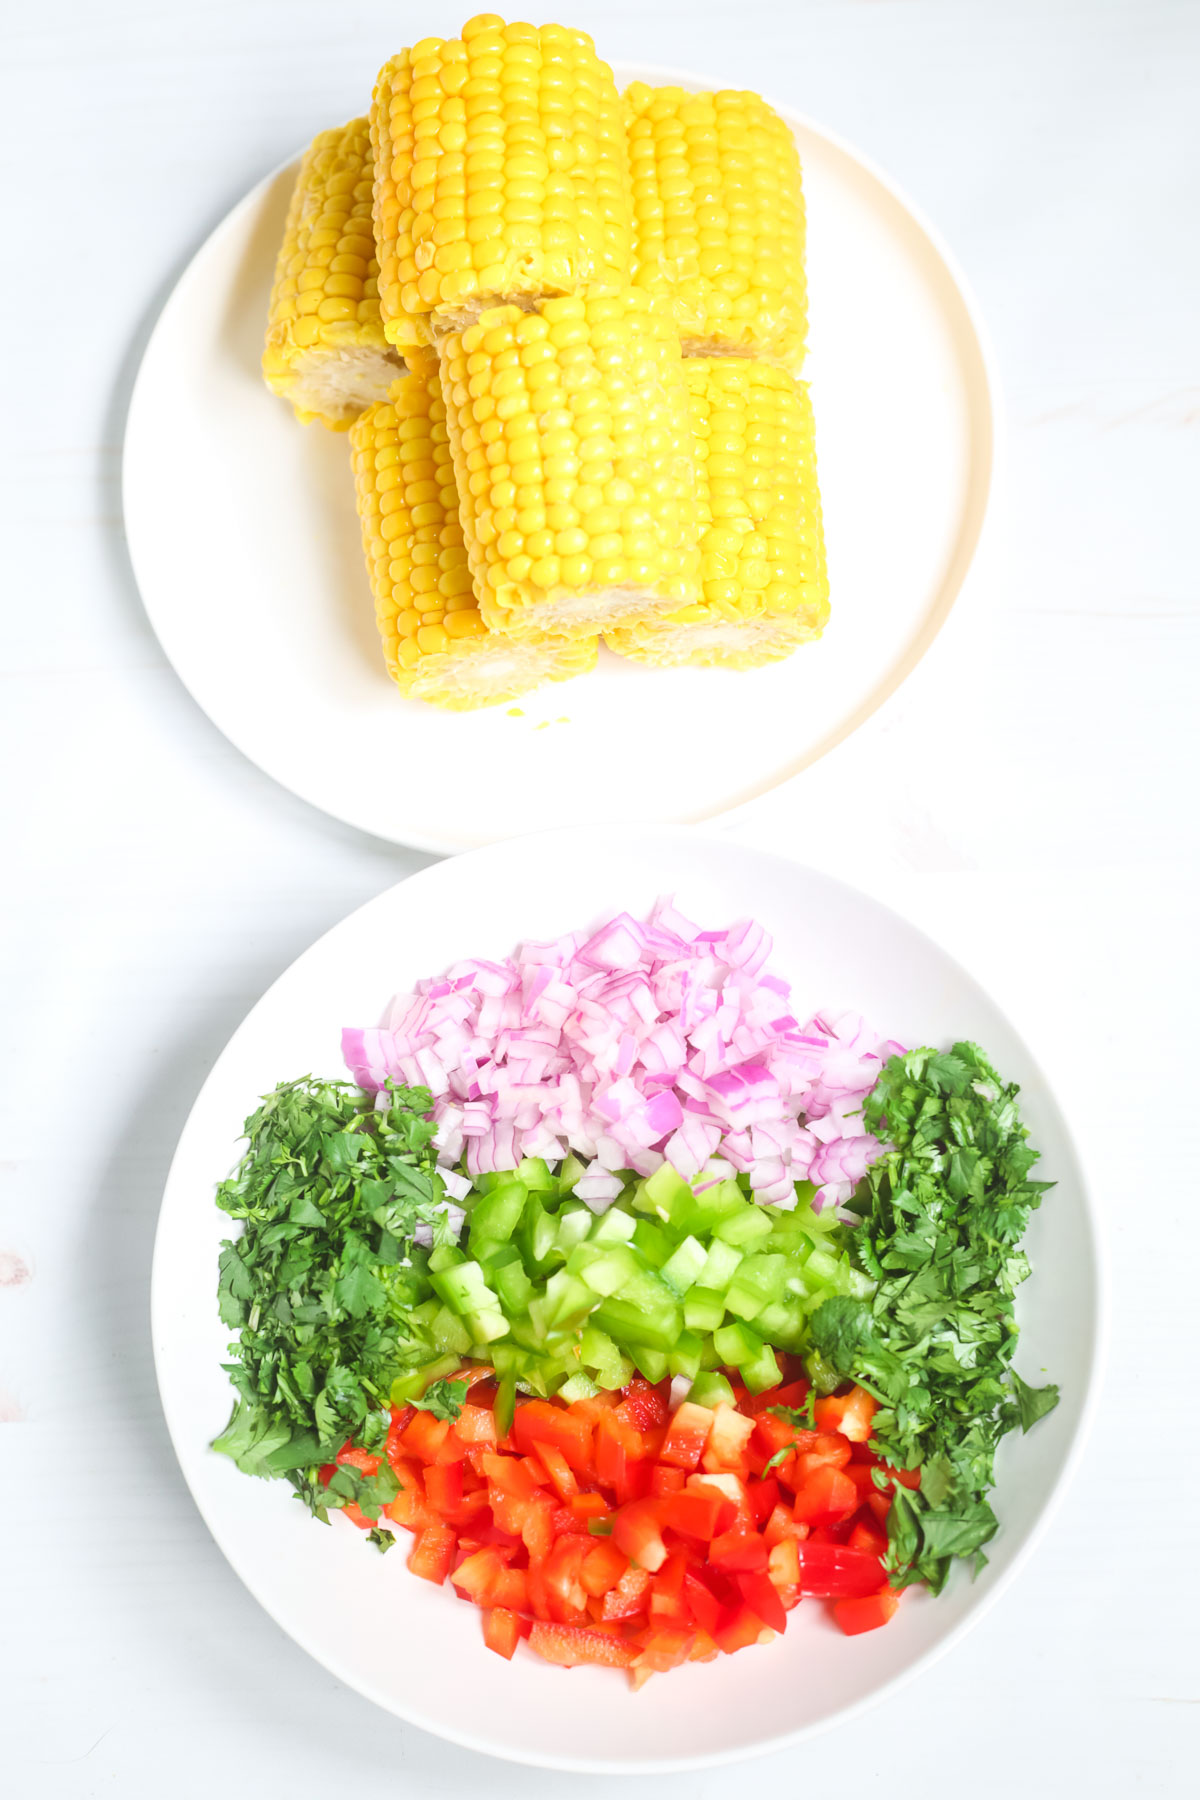 Grilled corn with chopped vegetables on a plate.